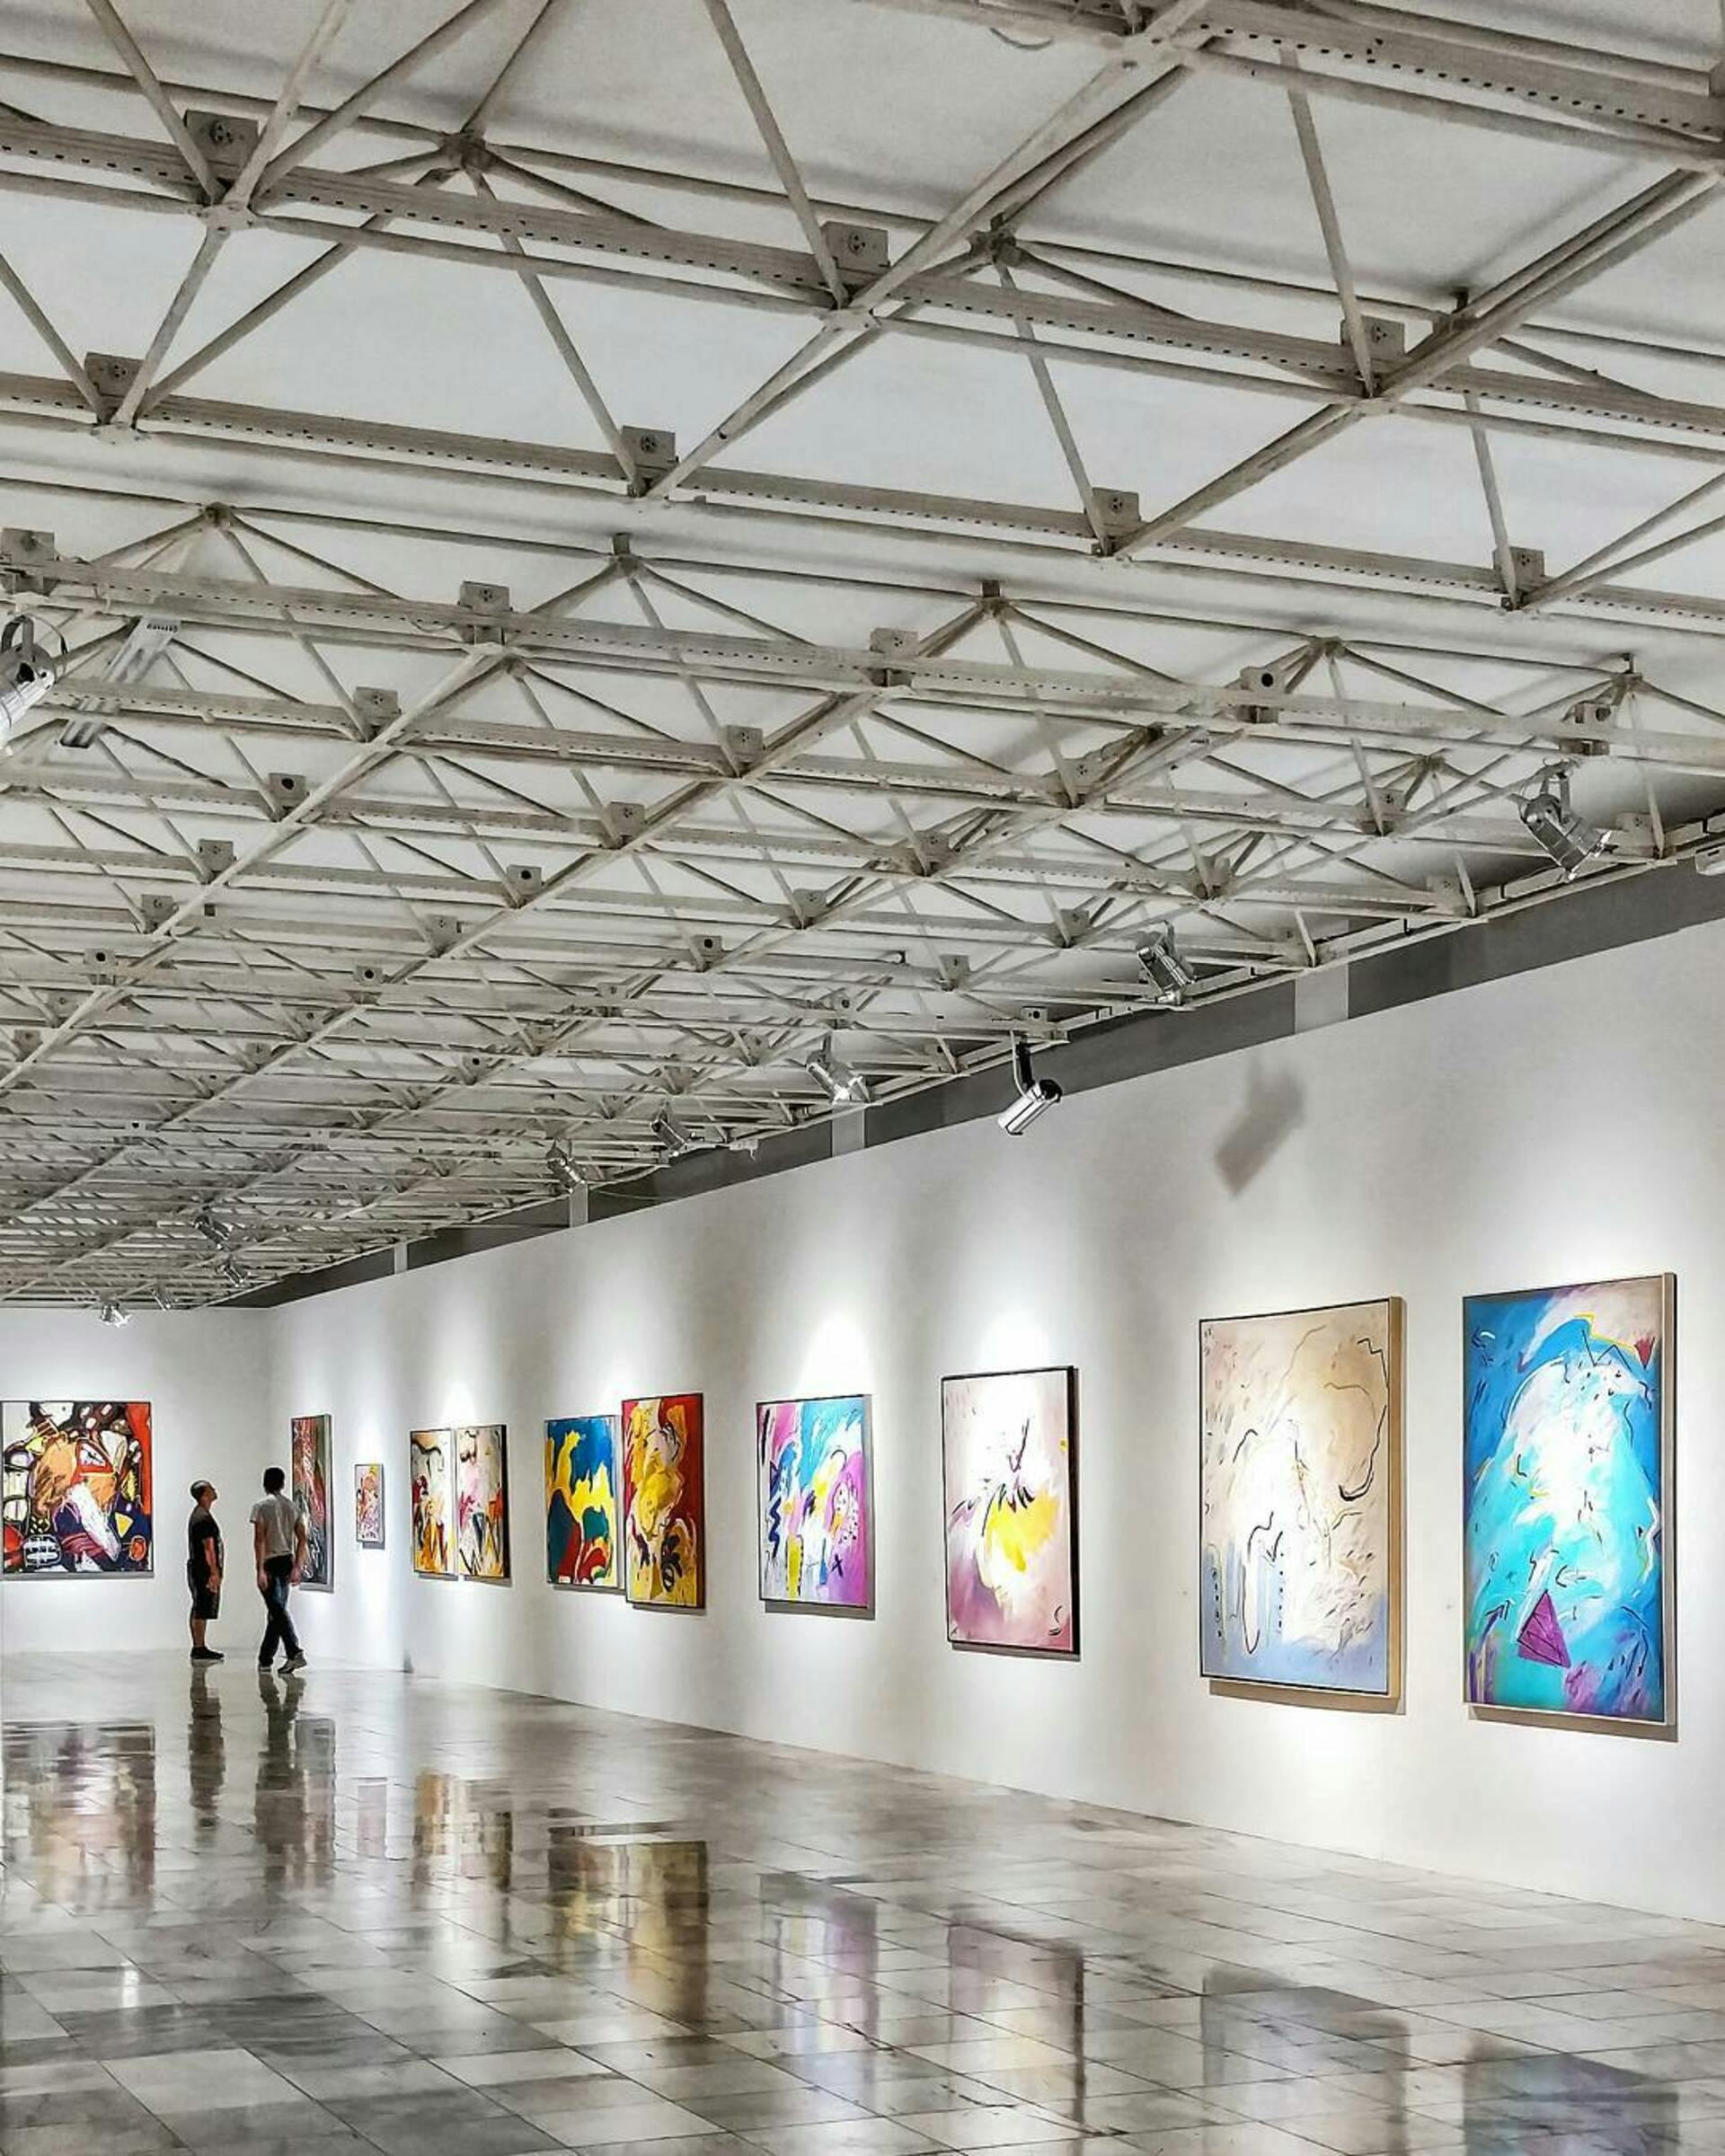 Colorful art hanging in a gallery | Source: Pexels